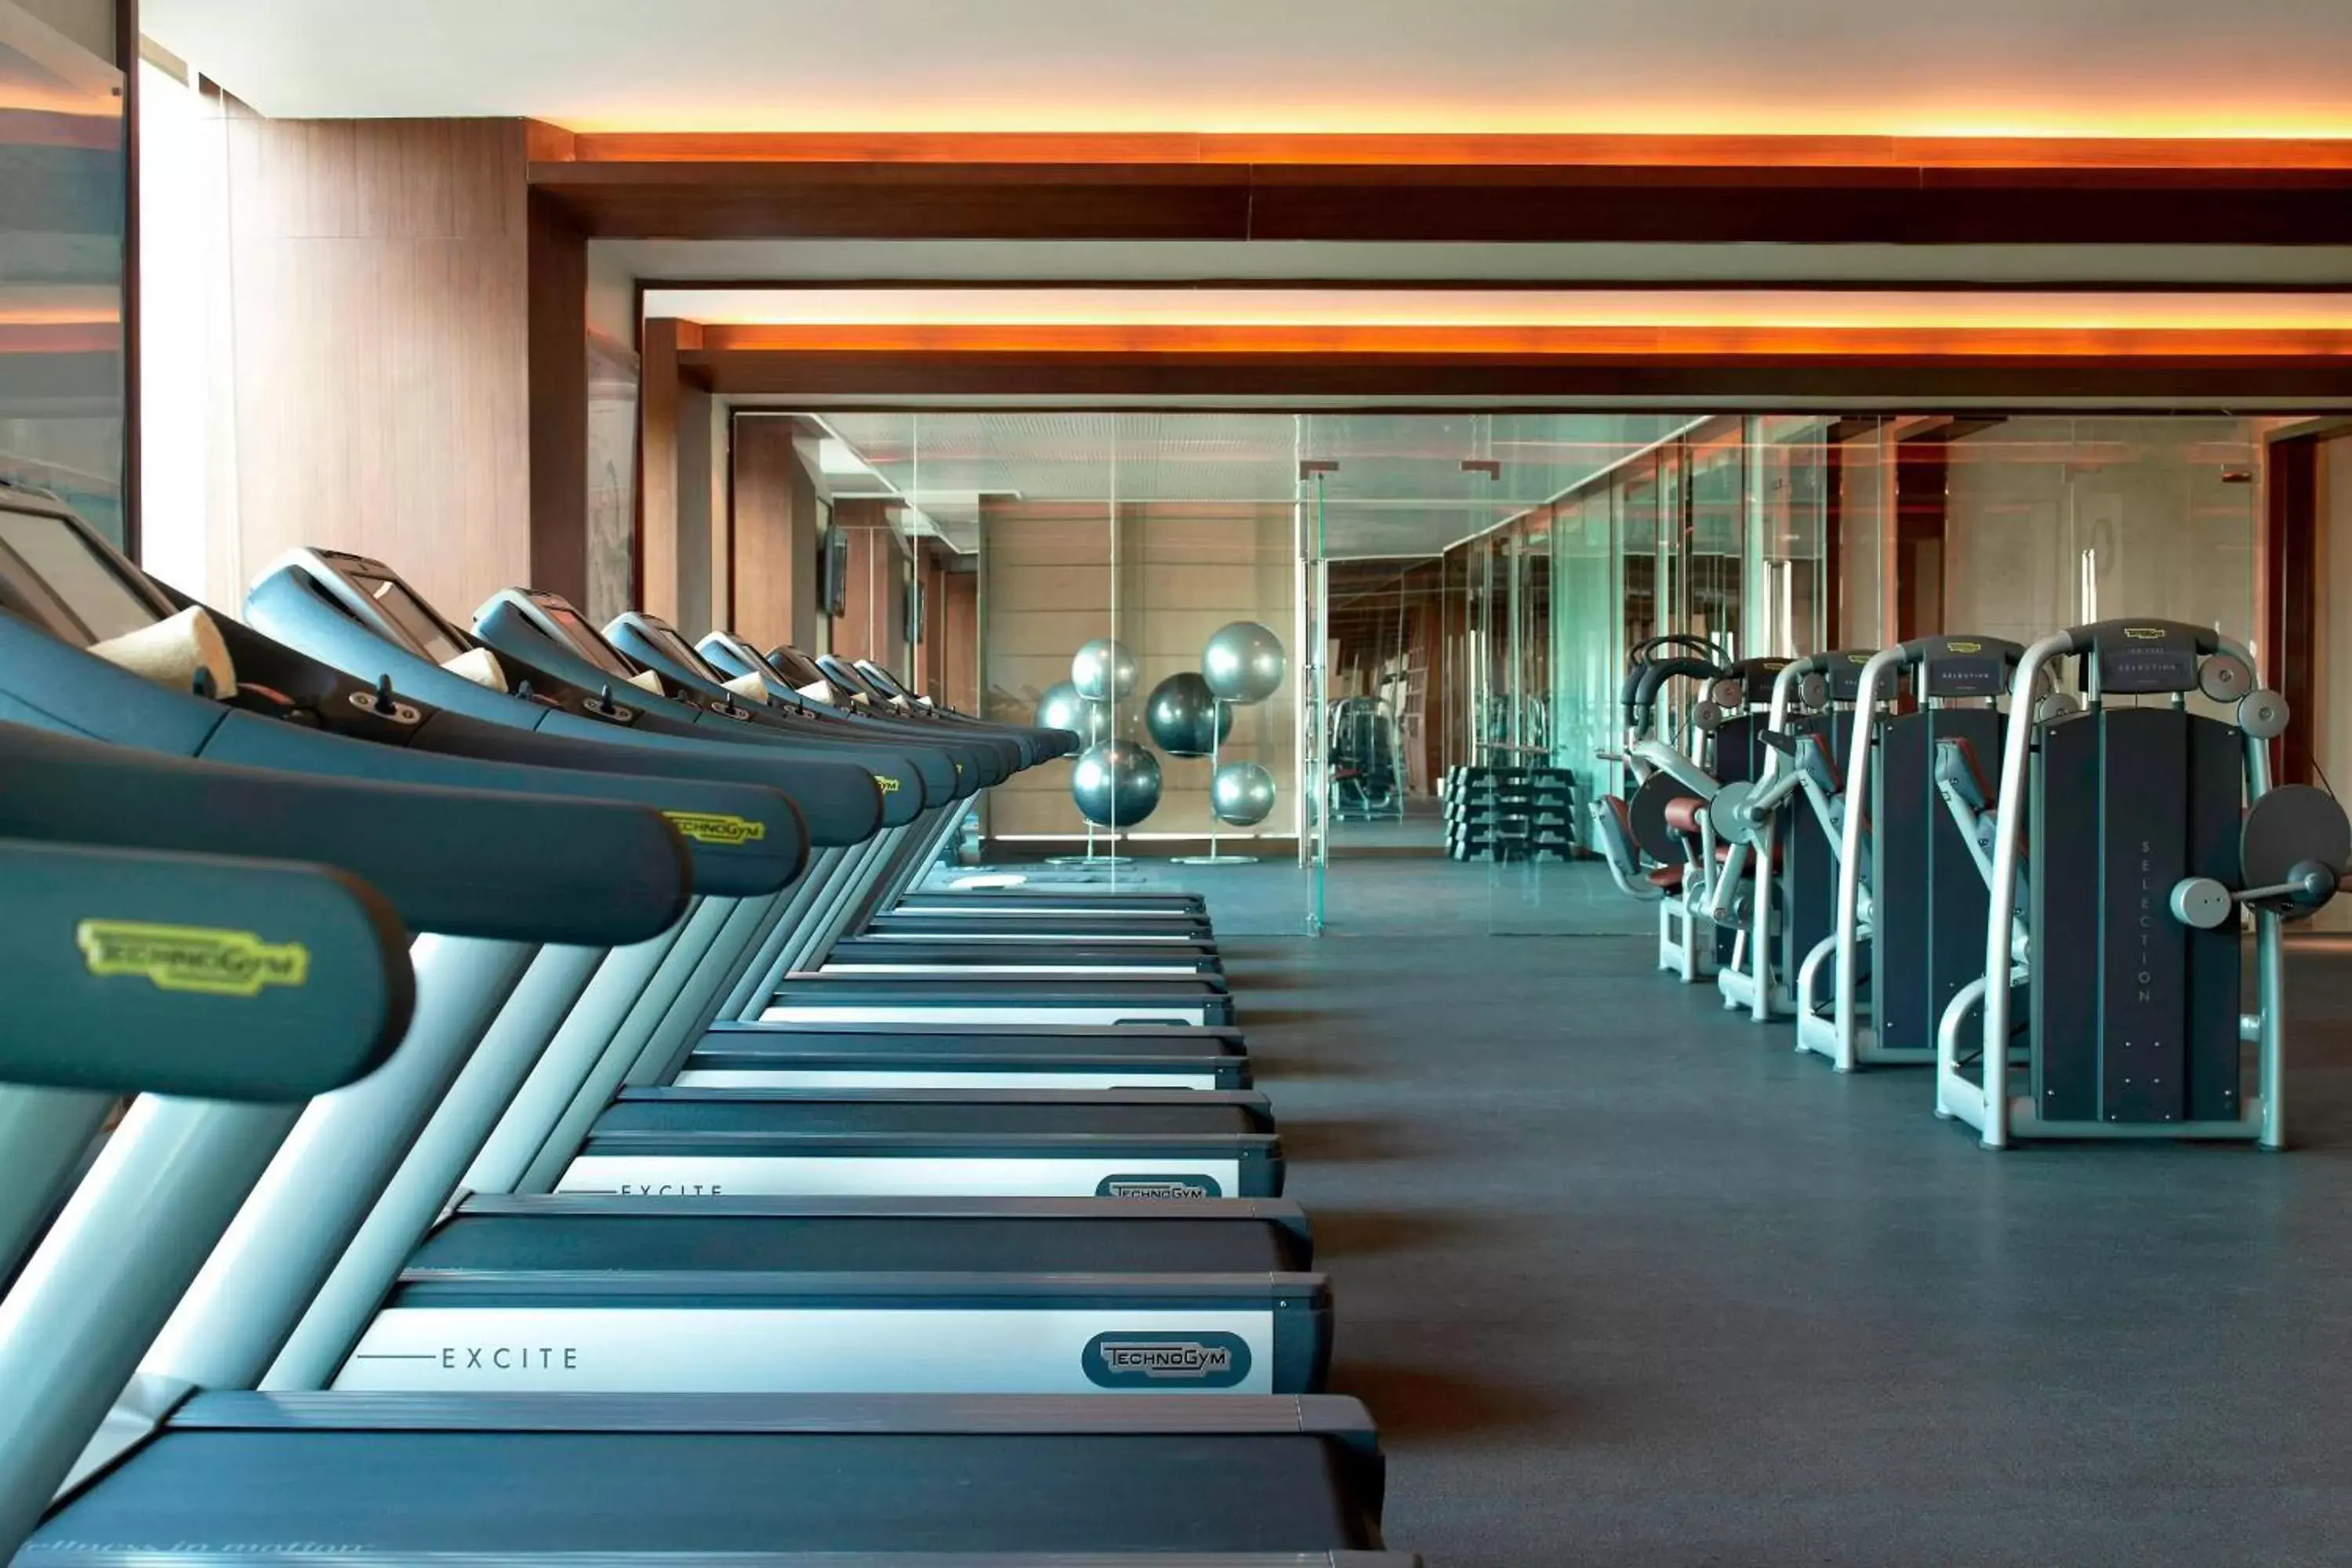 Fitness centre/facilities, Fitness Center/Facilities in The Westin Tianjin